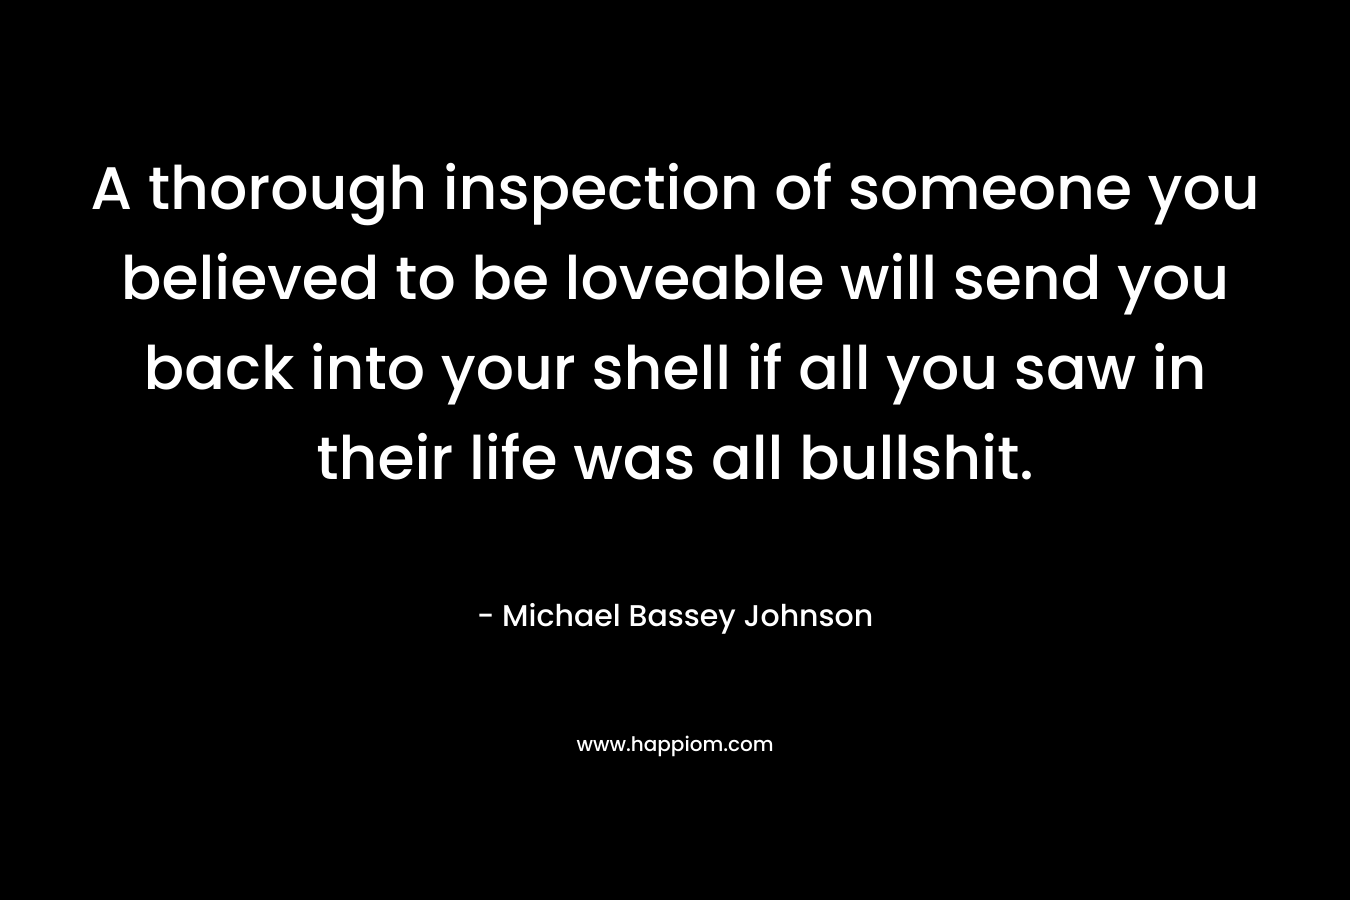 A thorough inspection of someone you believed to be loveable will send you back into your shell if all you saw in their life was all bullshit. – Michael Bassey Johnson